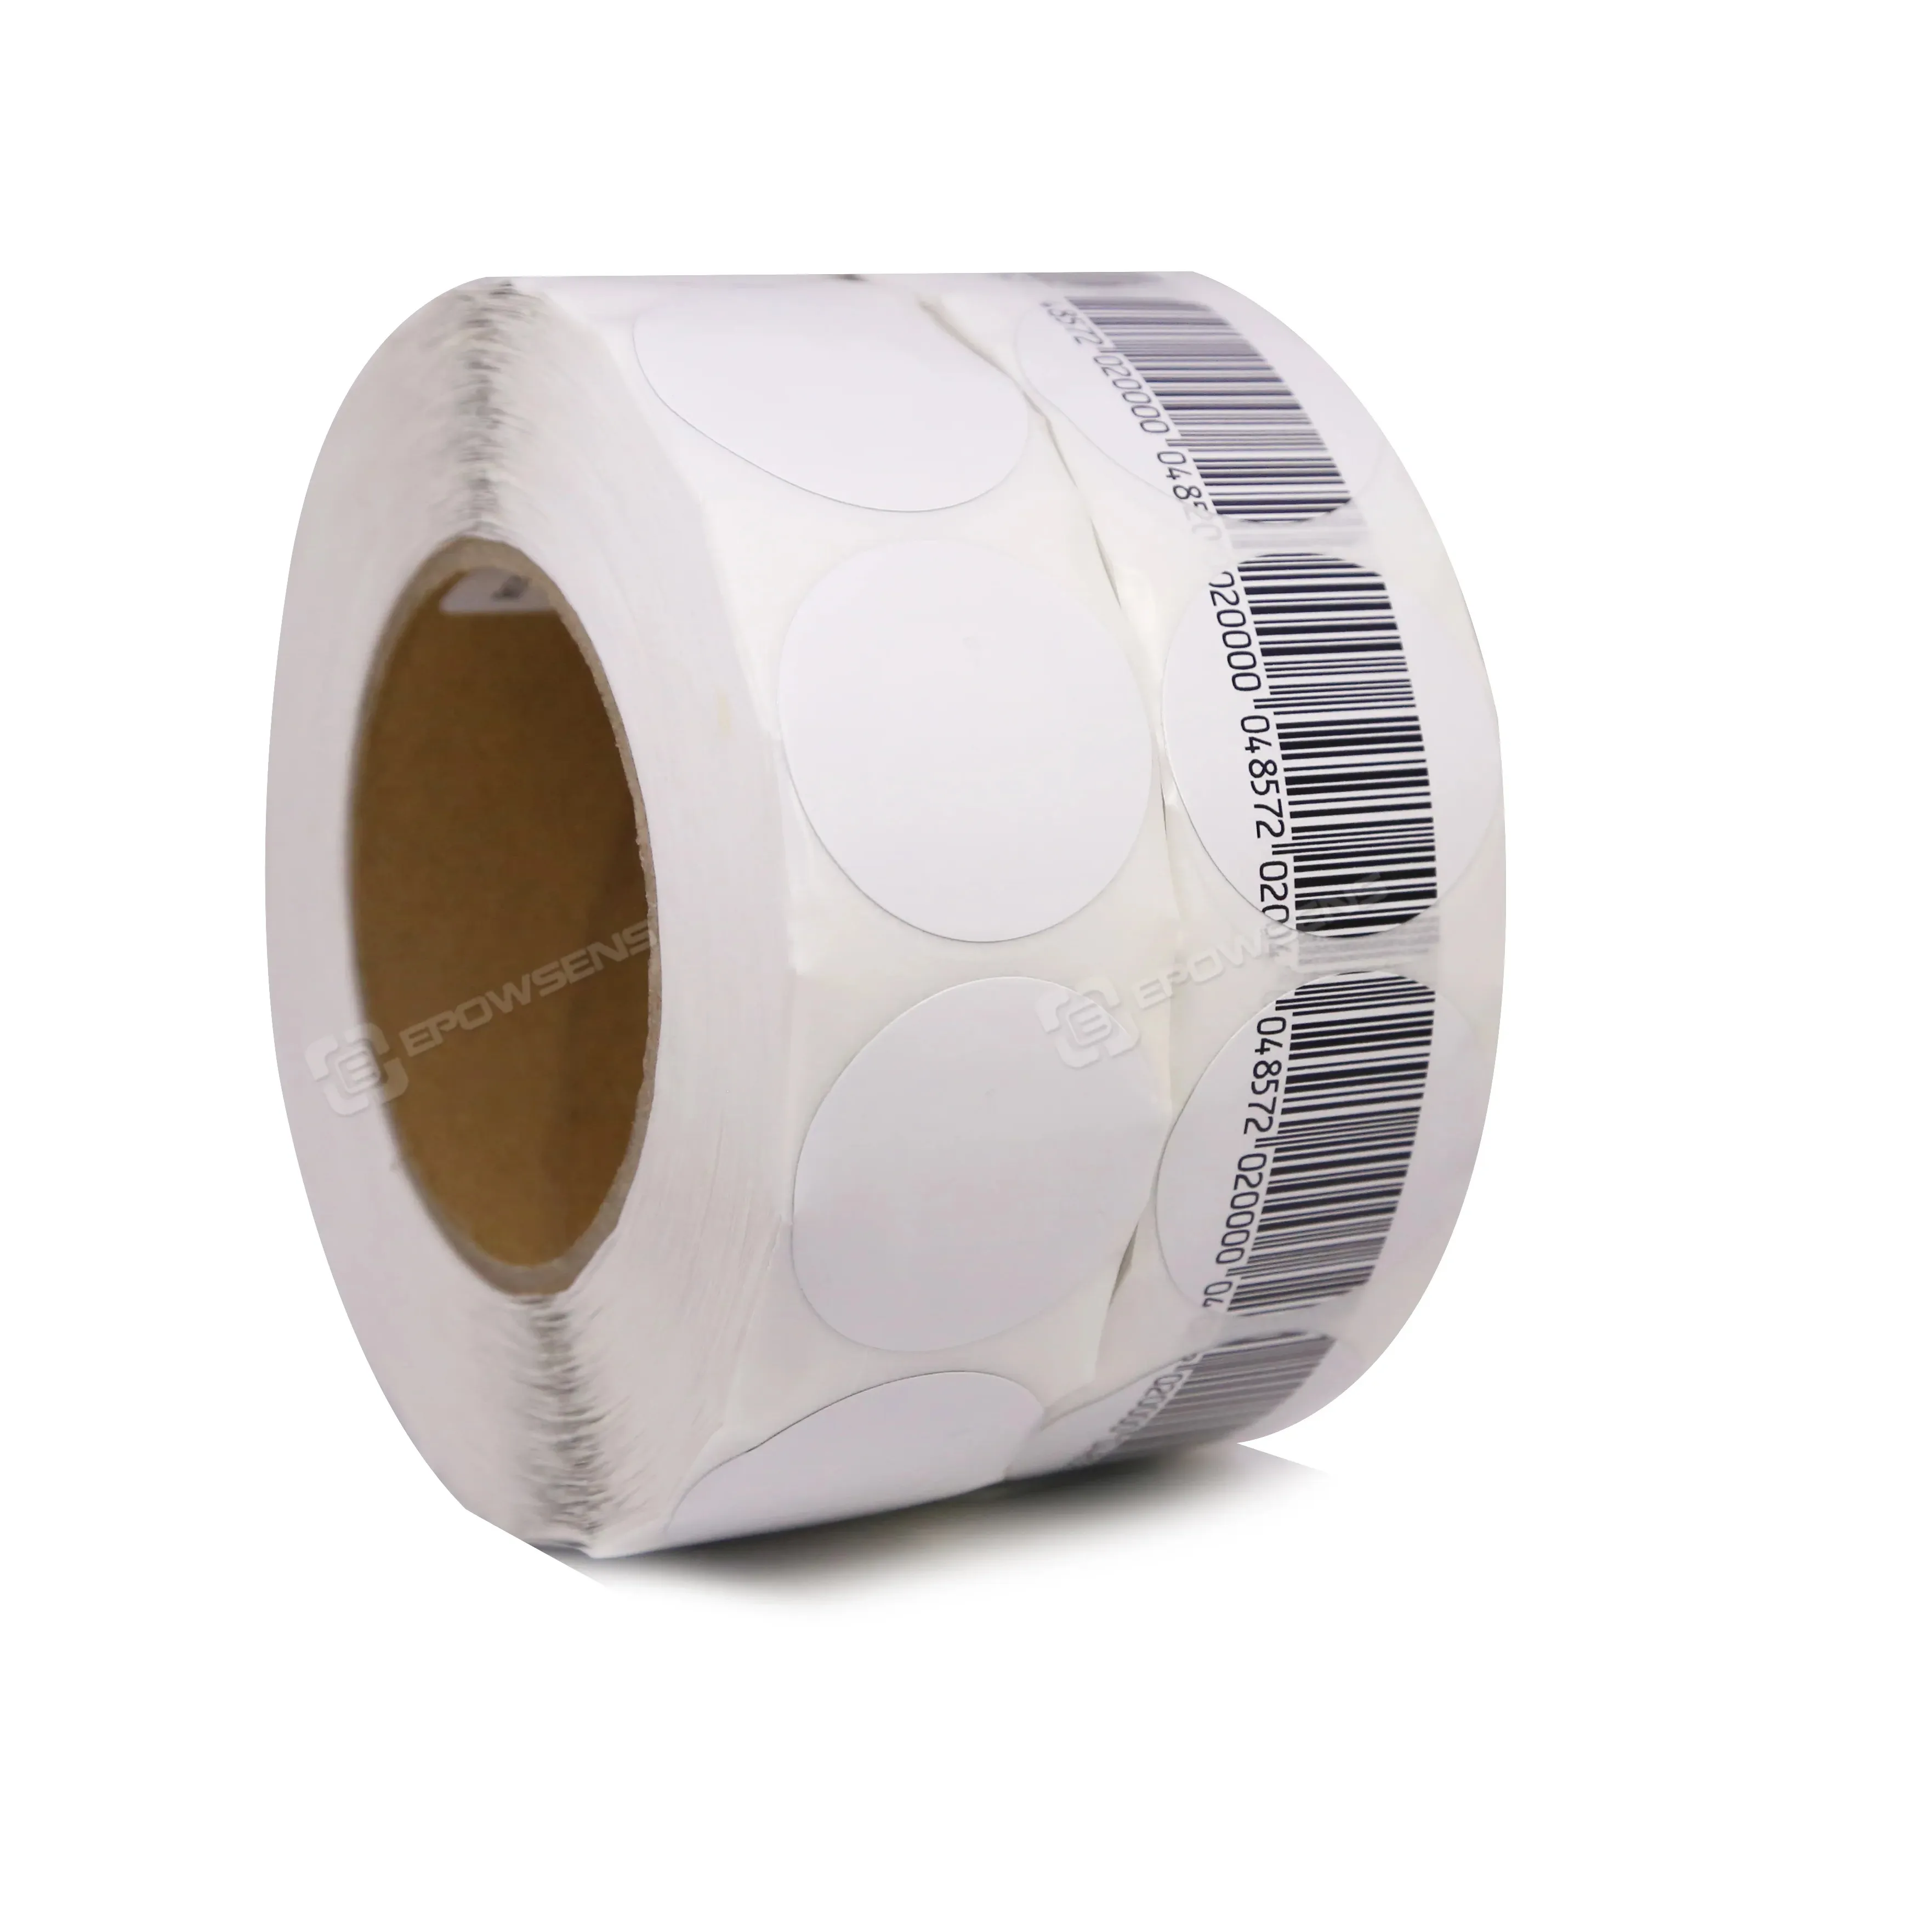 40mm round Dummy Barcode EAS Anti Theft RF Label 8.2mhz RF Sticker Soft Label for Retail Security